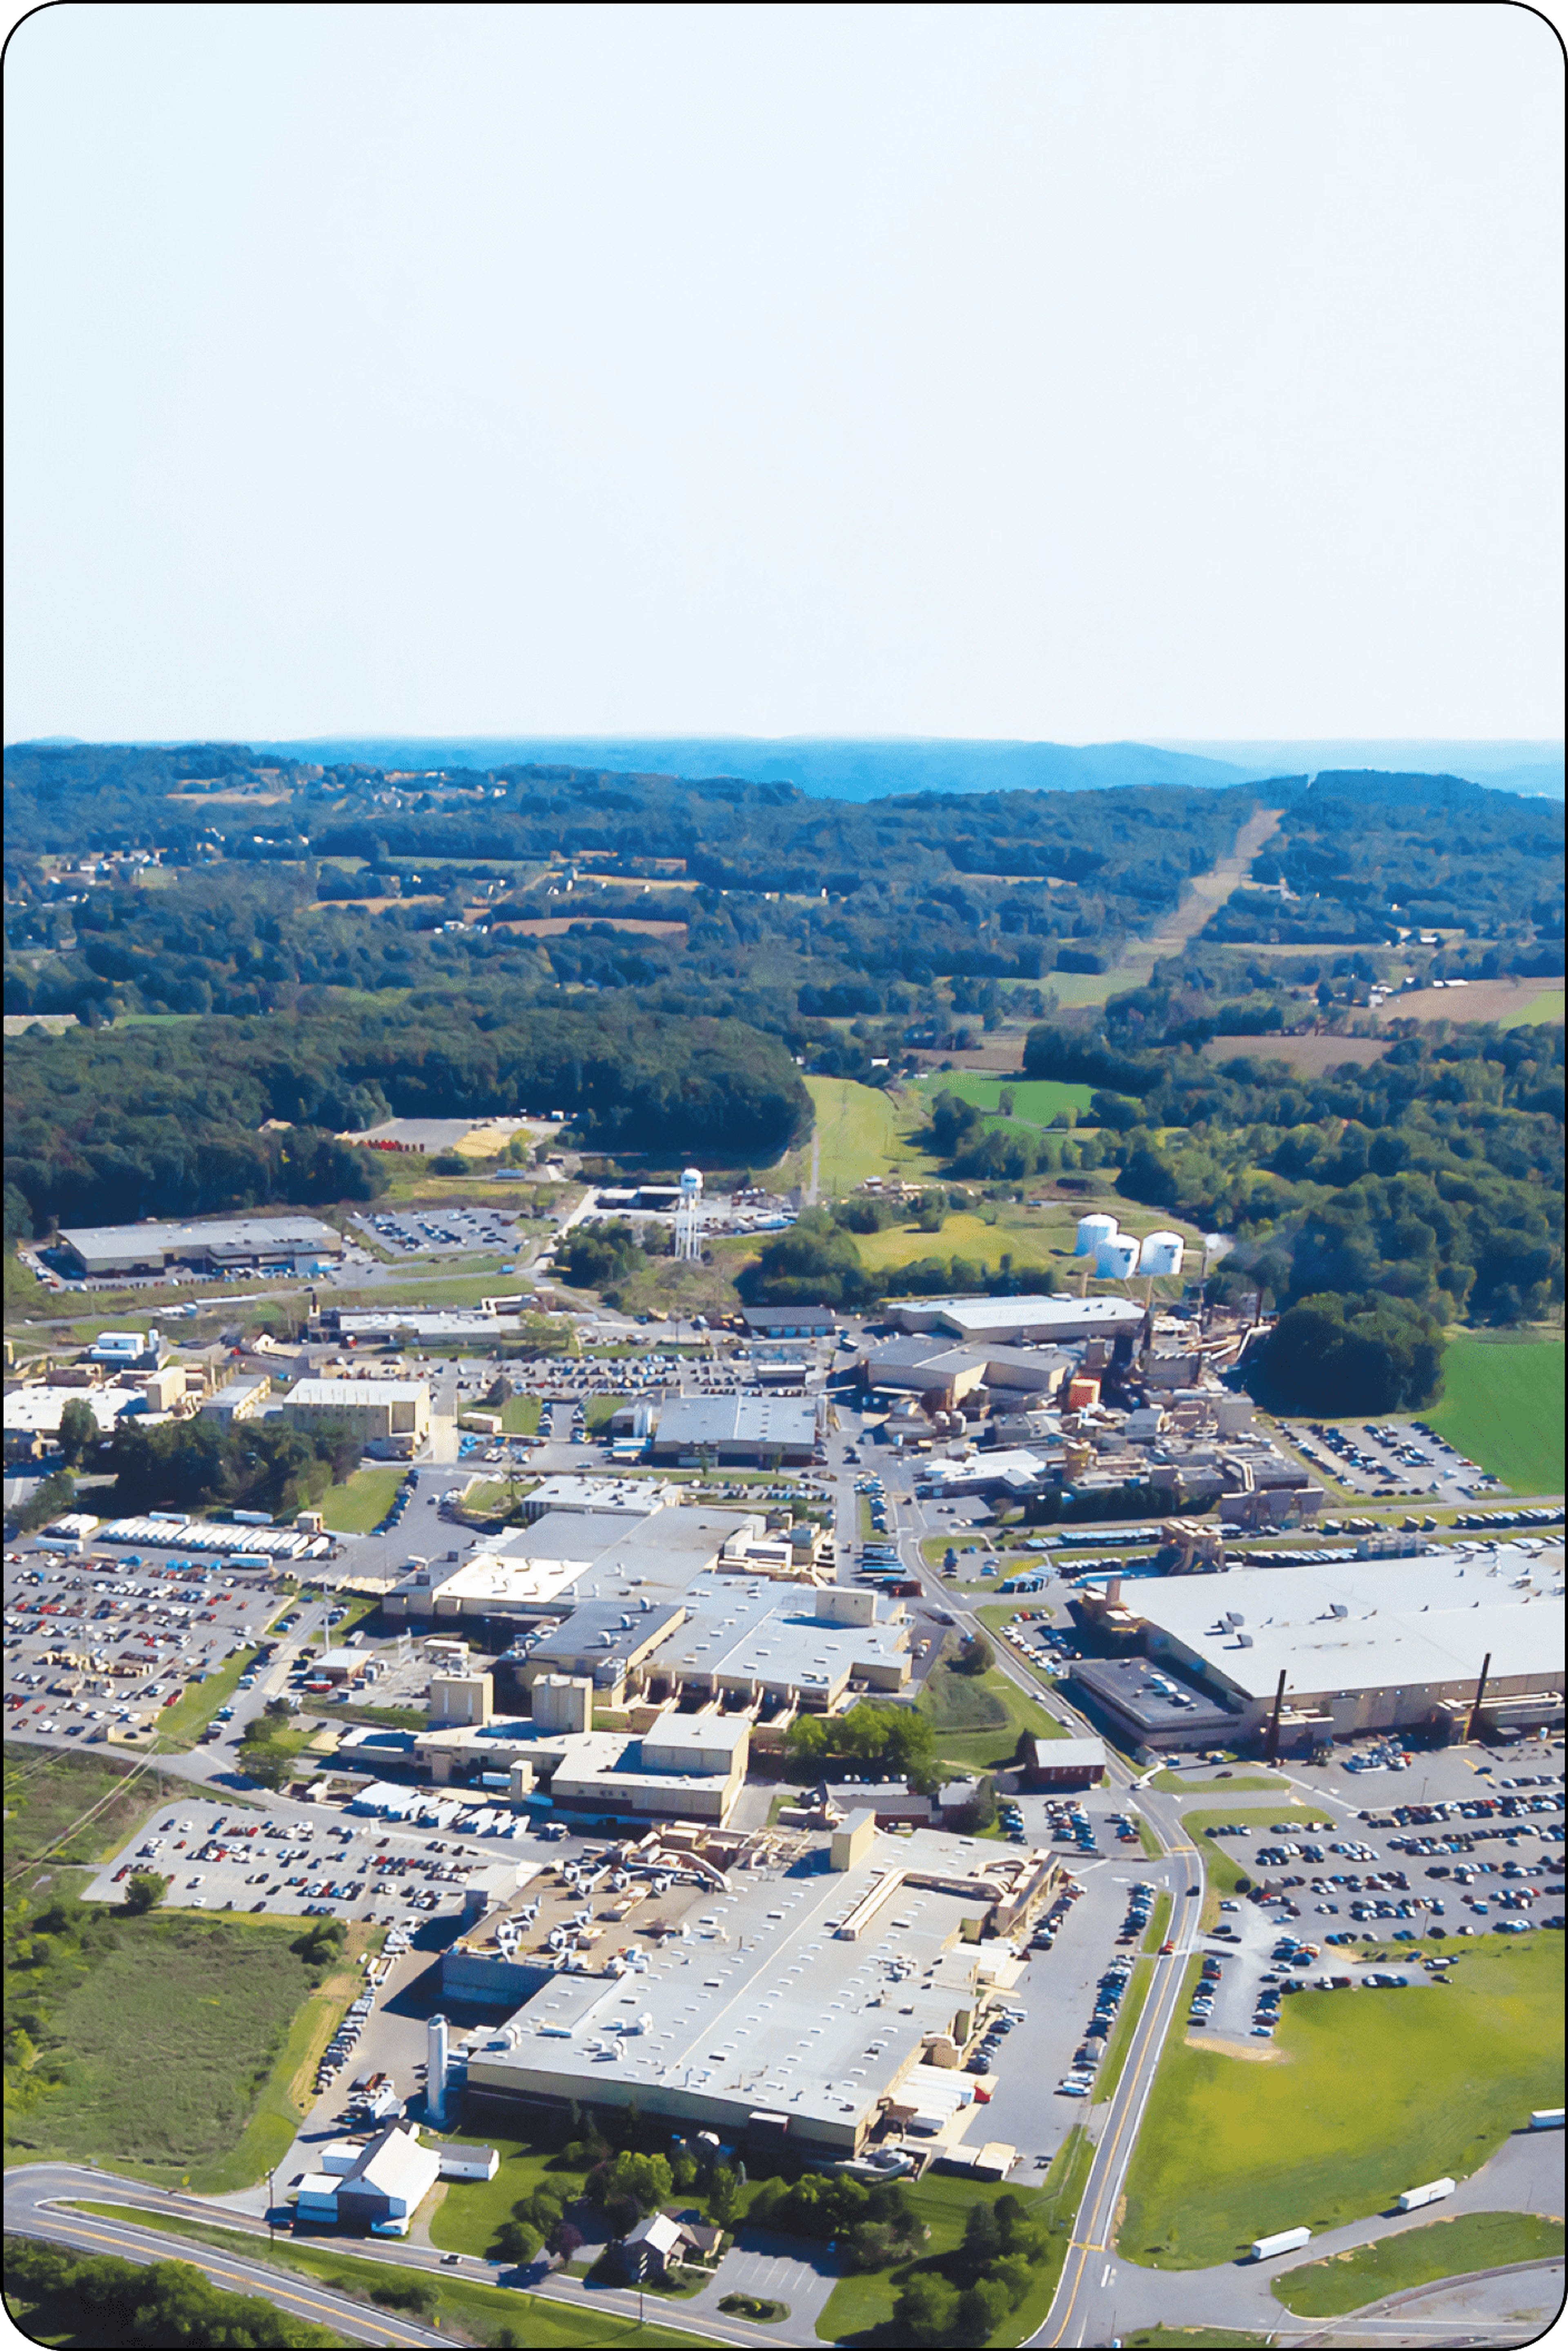 Bird's eye view picture of East Penn manufacturing facility